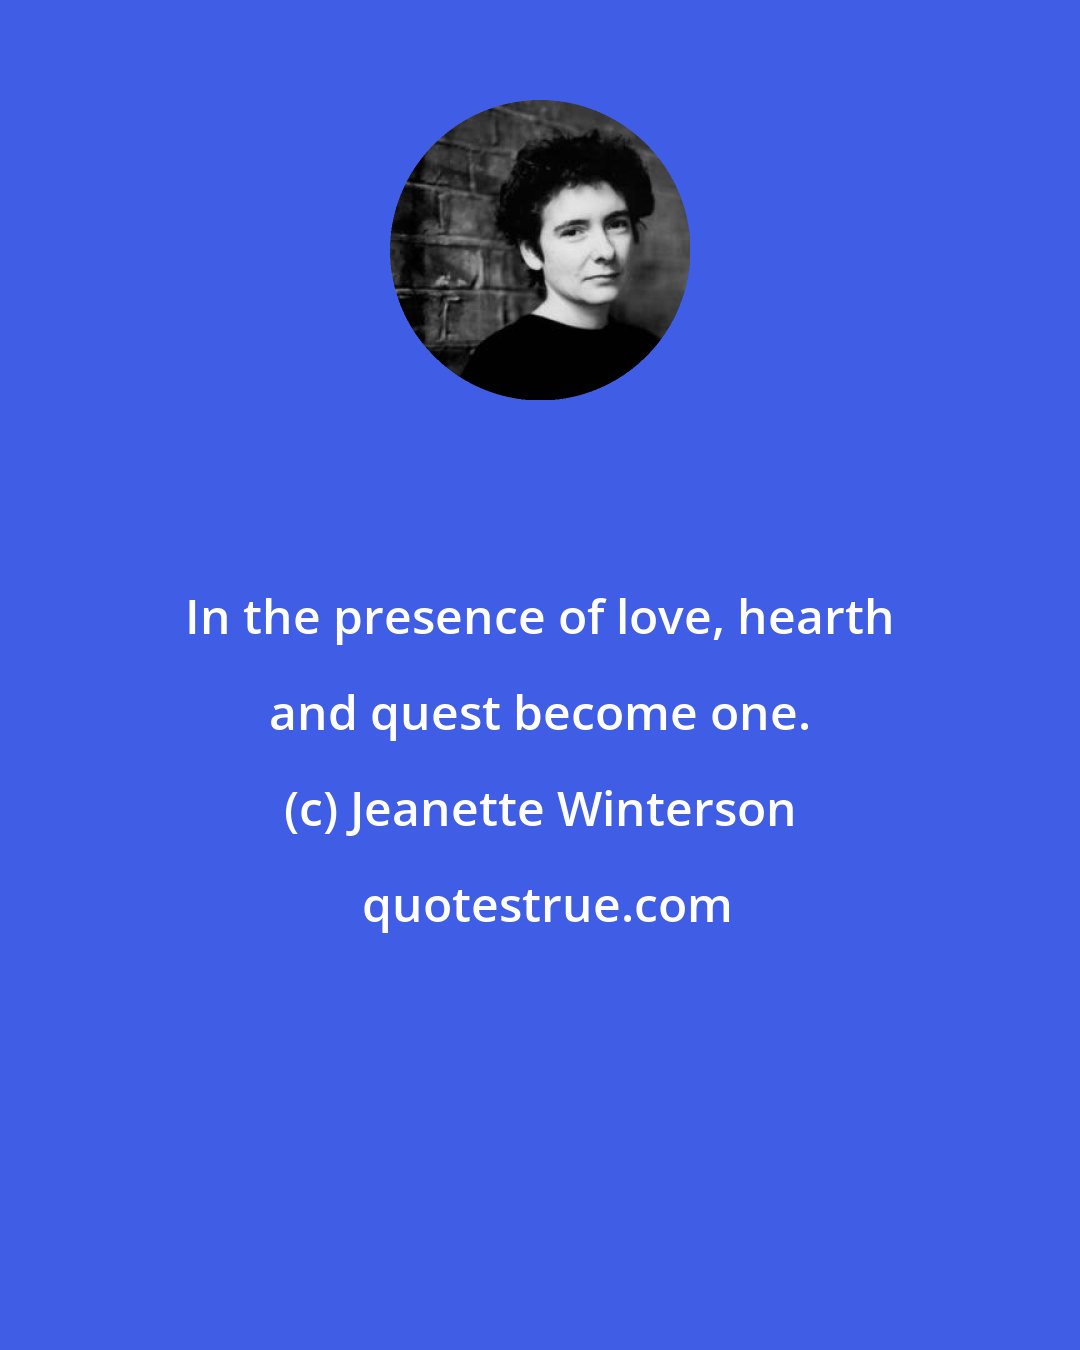 Jeanette Winterson: In the presence of love, hearth and quest become one.